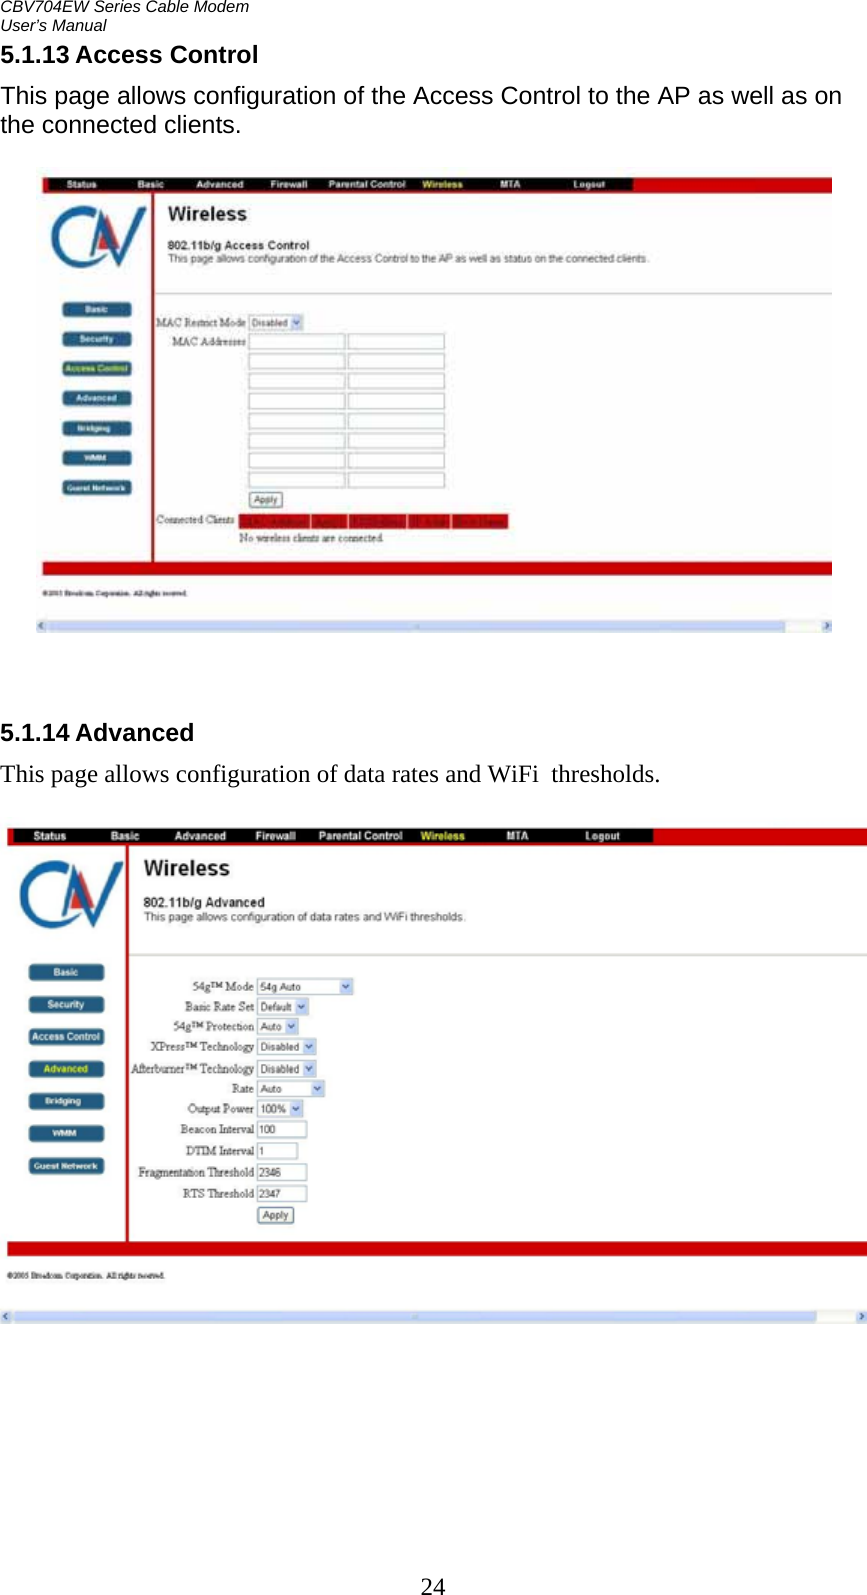 CBV704EW Series Cable Modem  User’s Manual 24 5.1.13 Access Control This page allows configuration of the Access Control to the AP as well as on the connected clients.      5.1.14 Advanced This page allows configuration of data rates and WiFi  thresholds.         